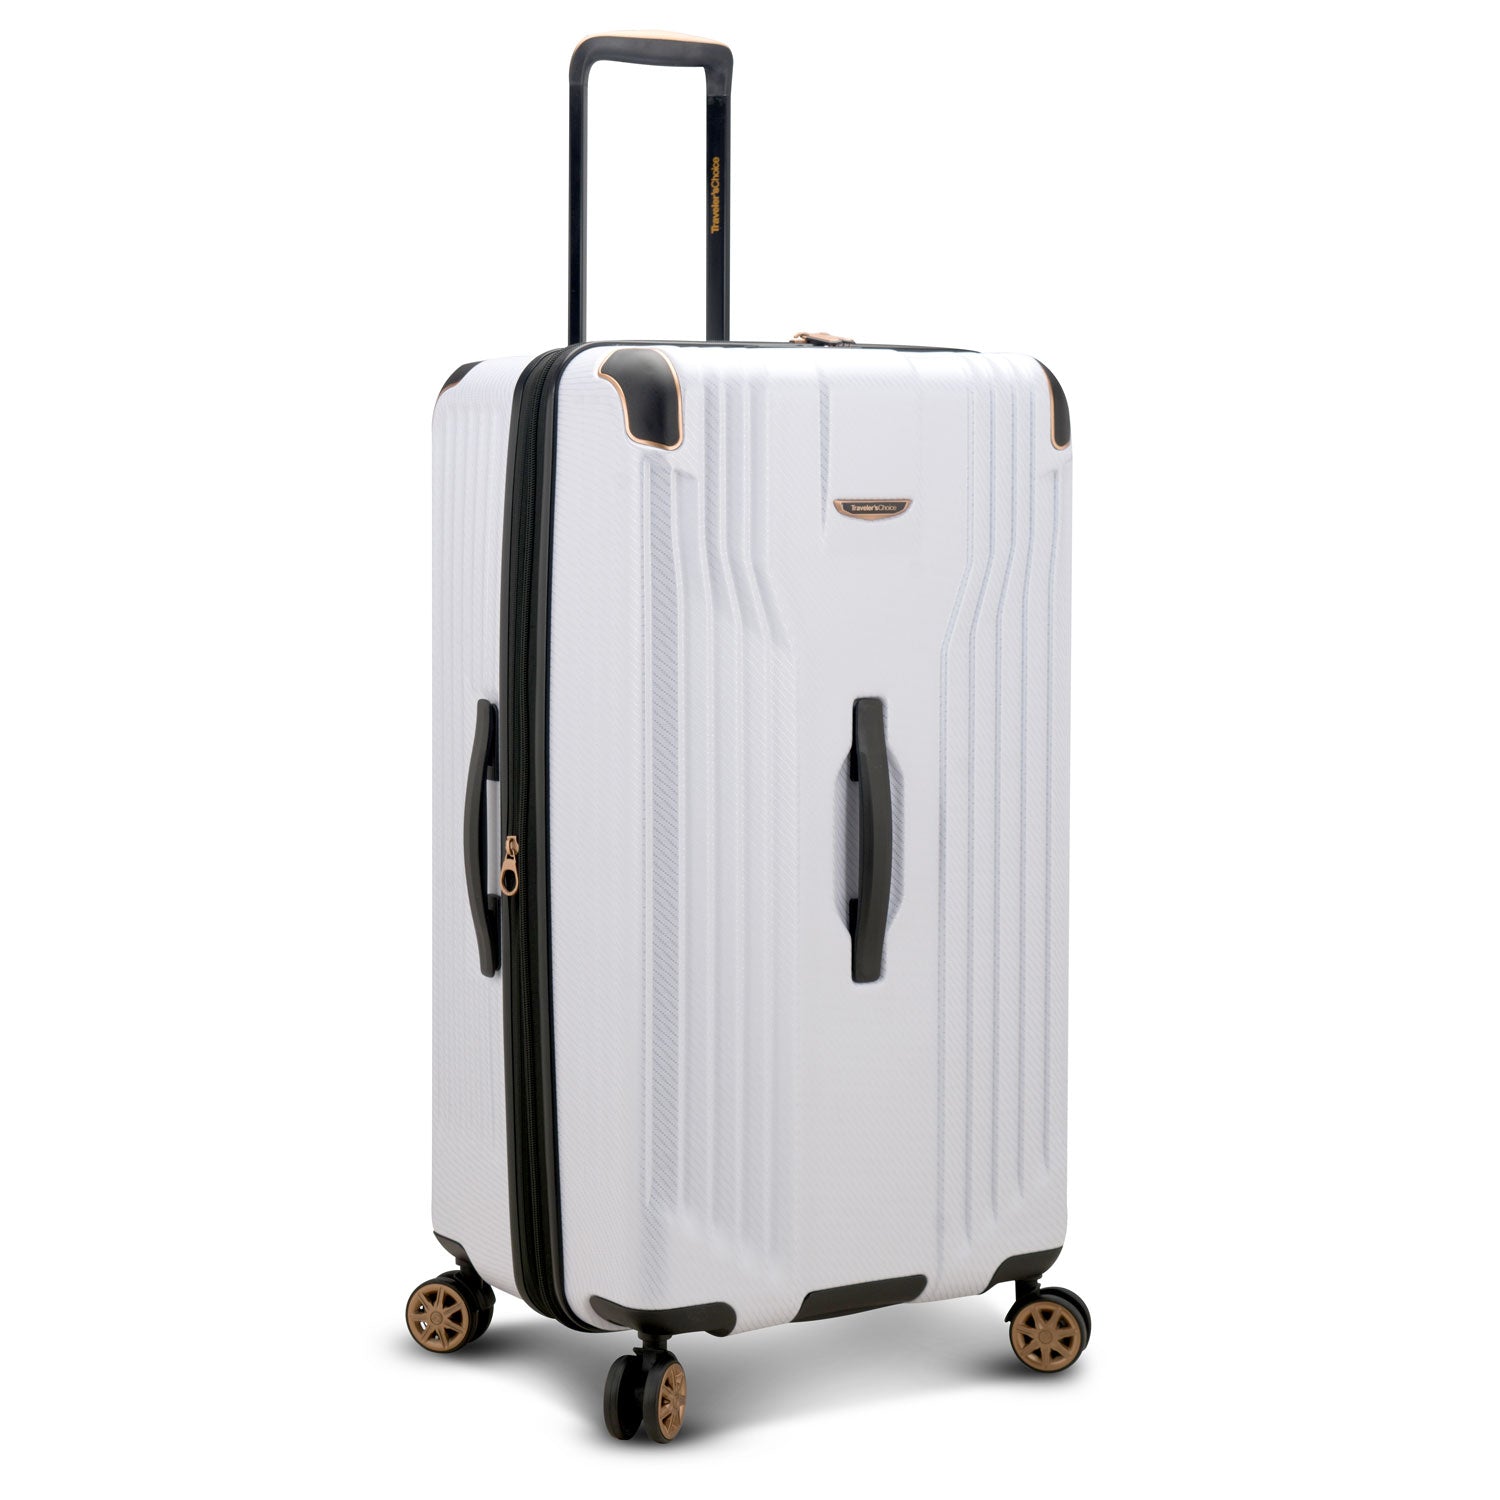 An image of a white trunk luggage.